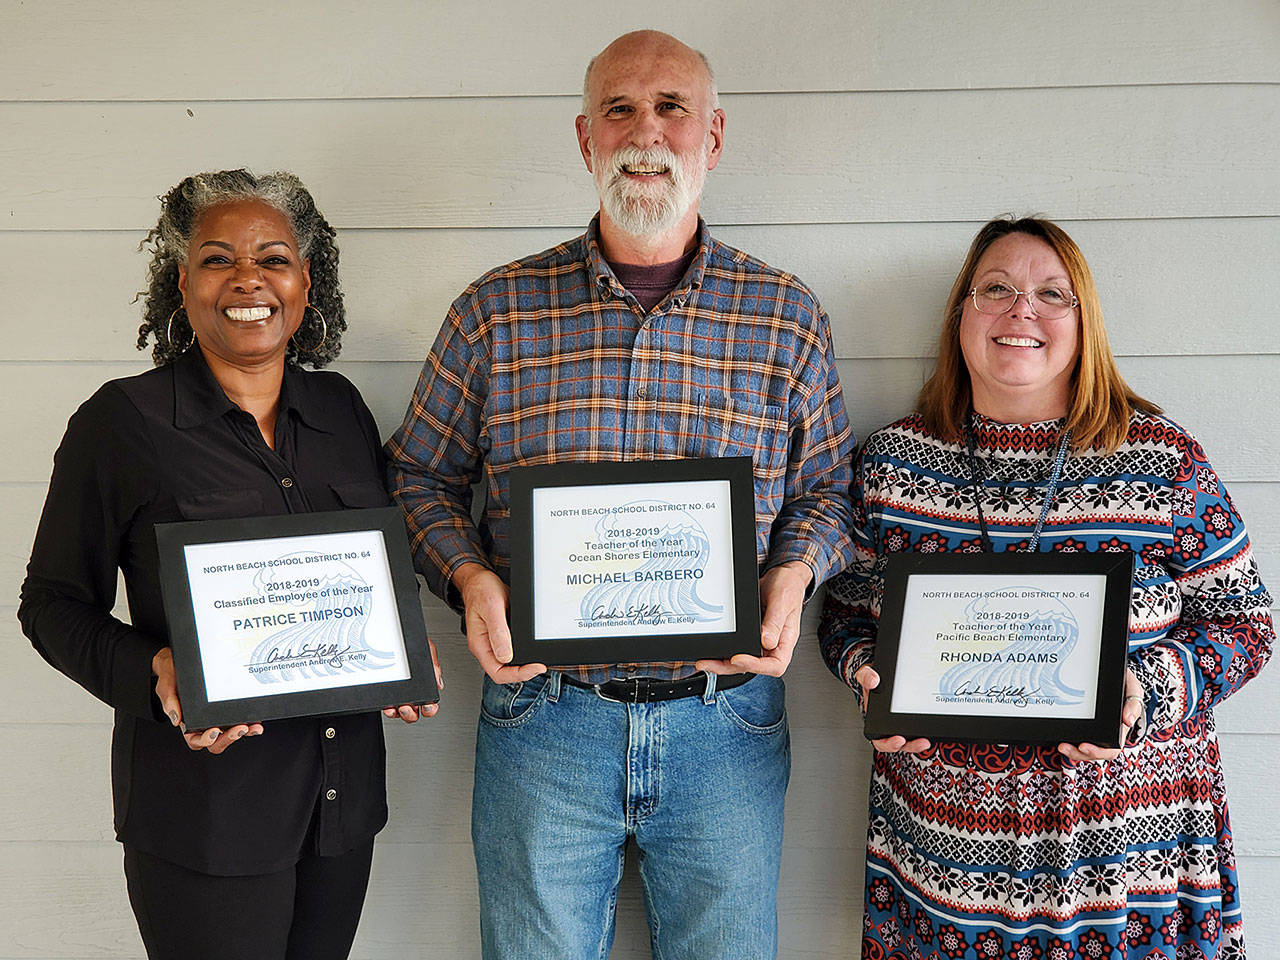 Three North Beach staff members honored by district